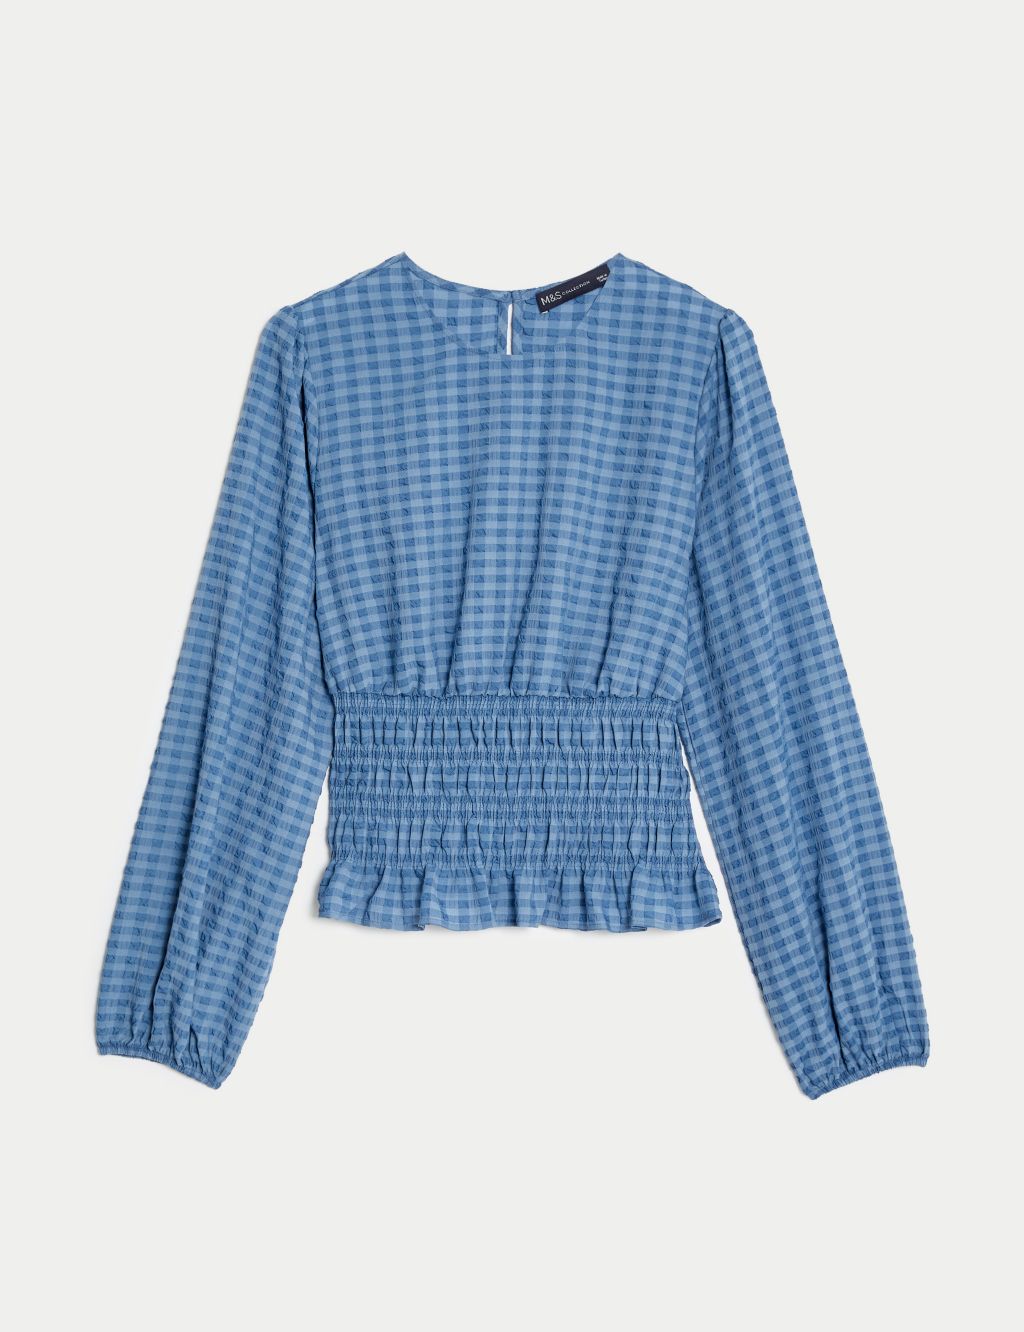 Checked Textured Waisted Blouse image 2